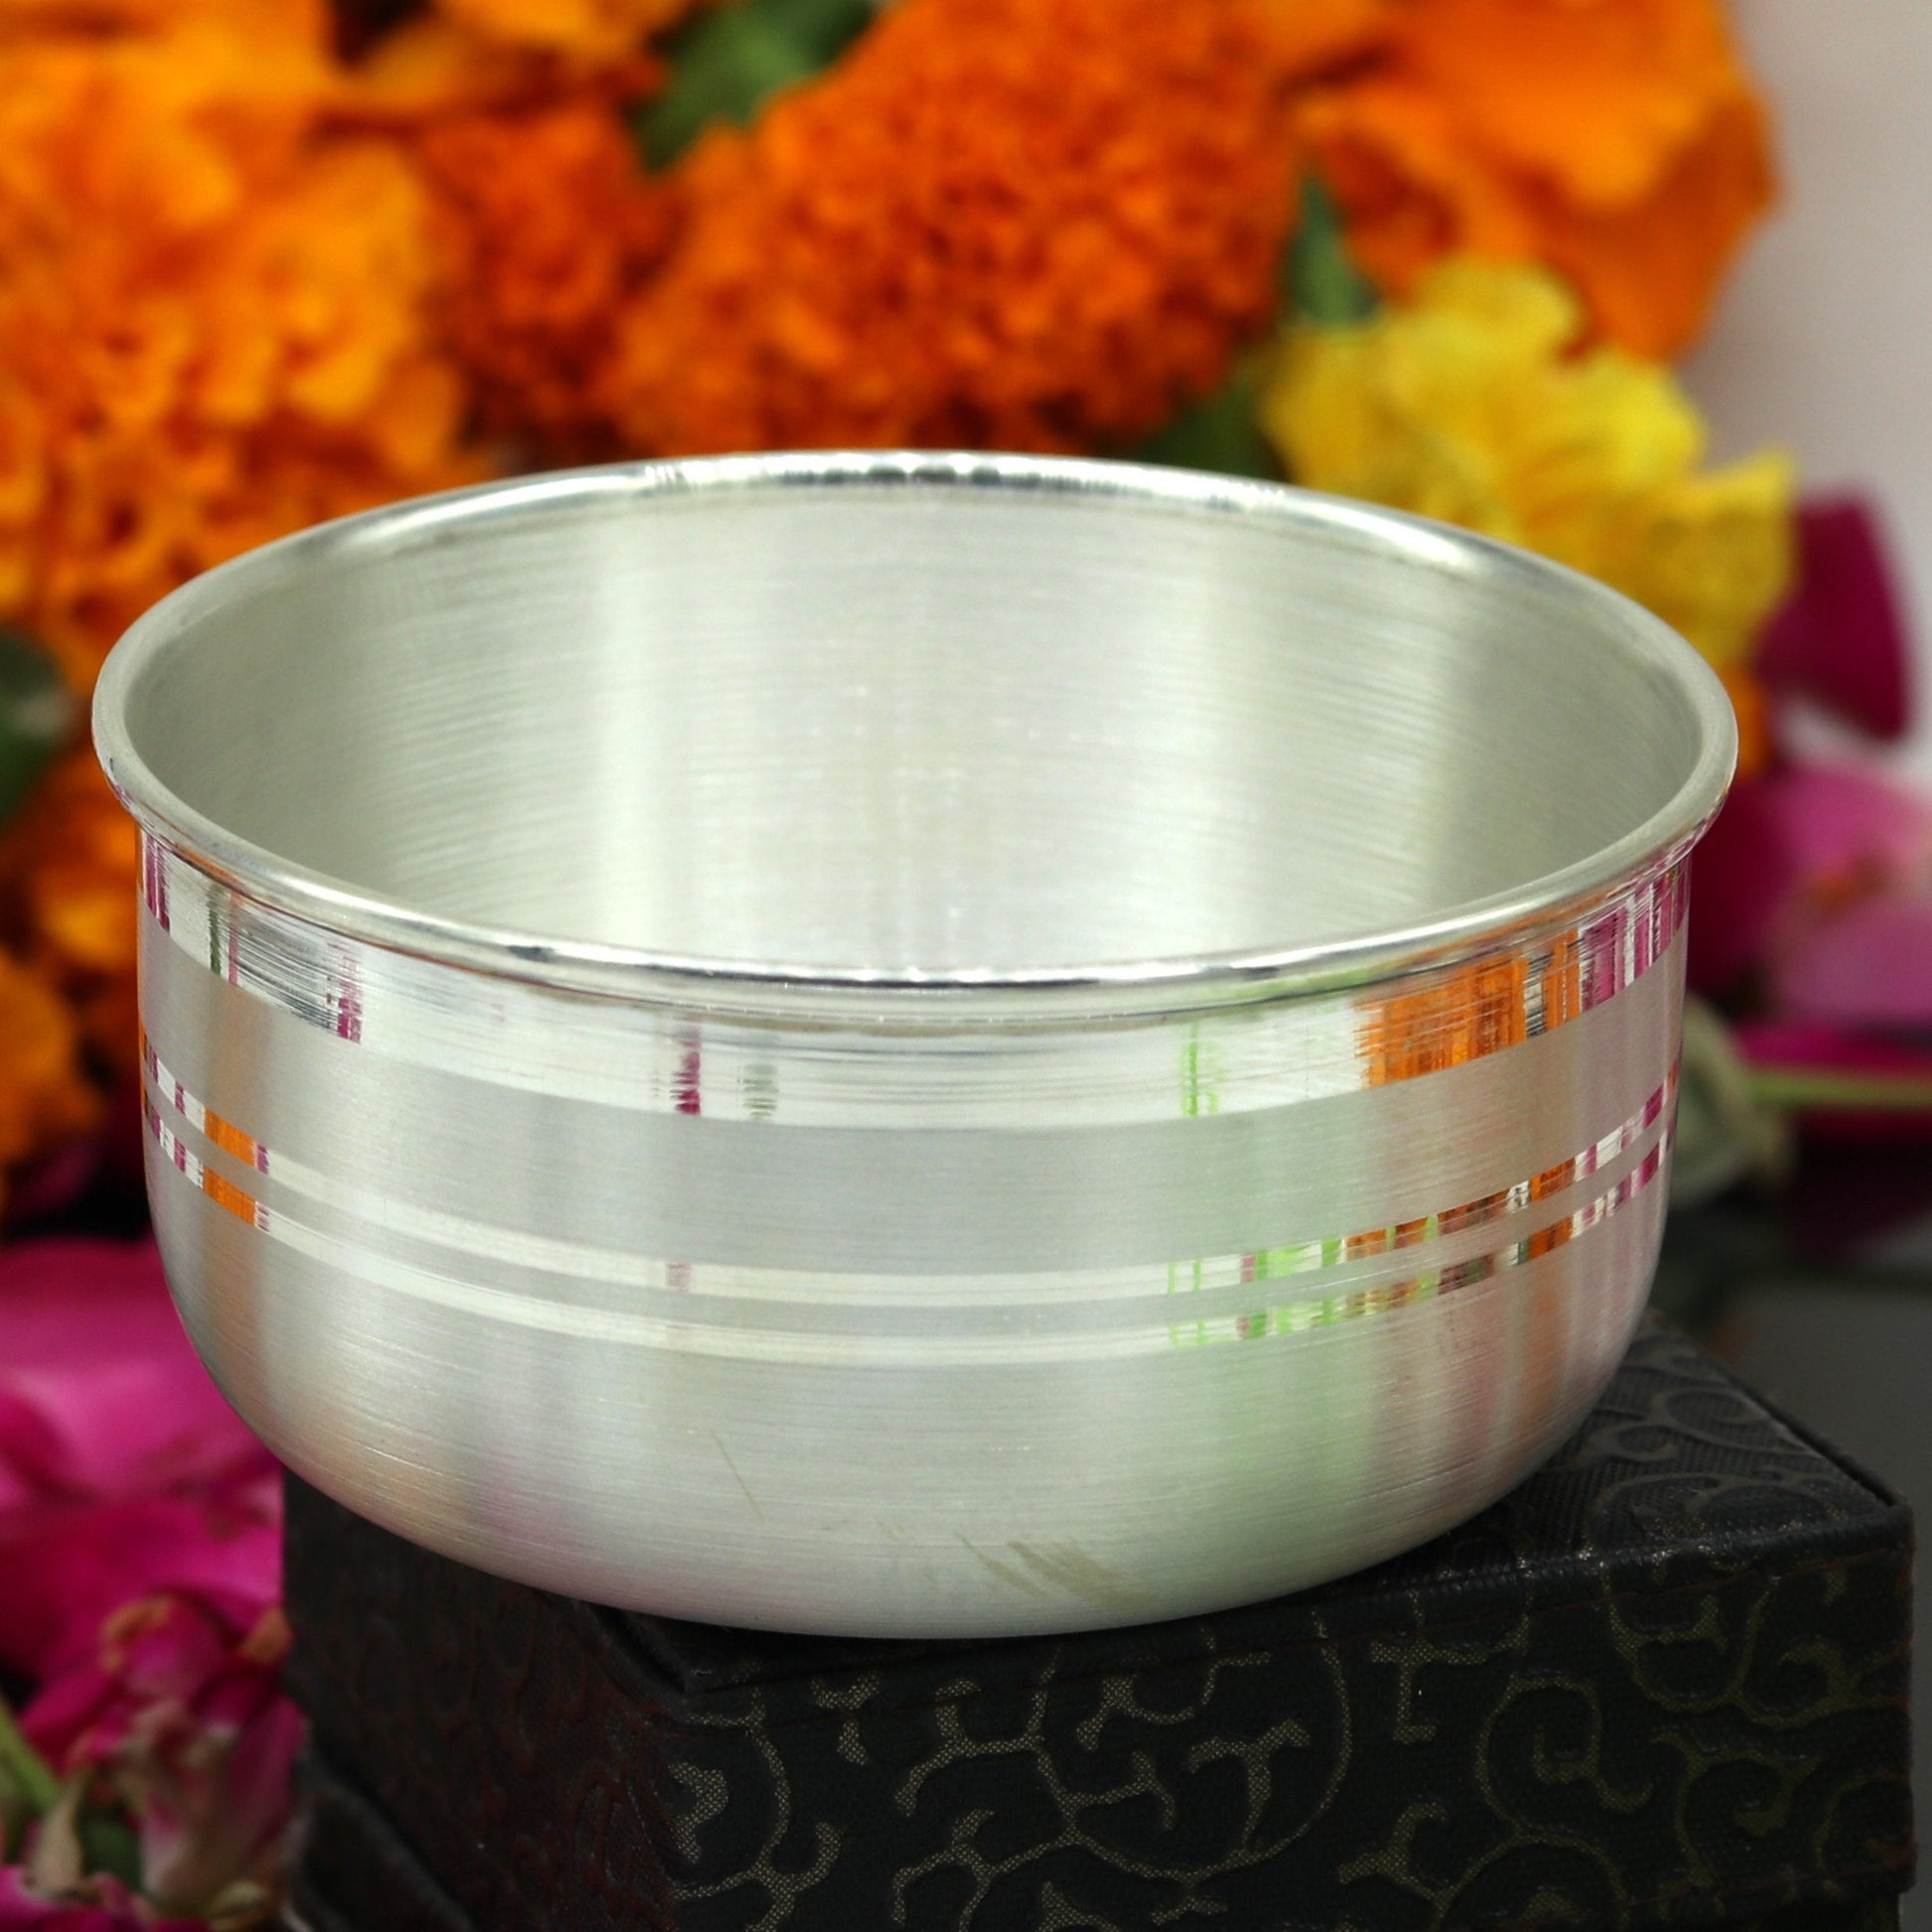 999 pure sterling silver handmade solid silver bowl kitchen utensils, vessels, silver has antibacterial properties, keep stay healthy sv55 - TRIBAL ORNAMENTS